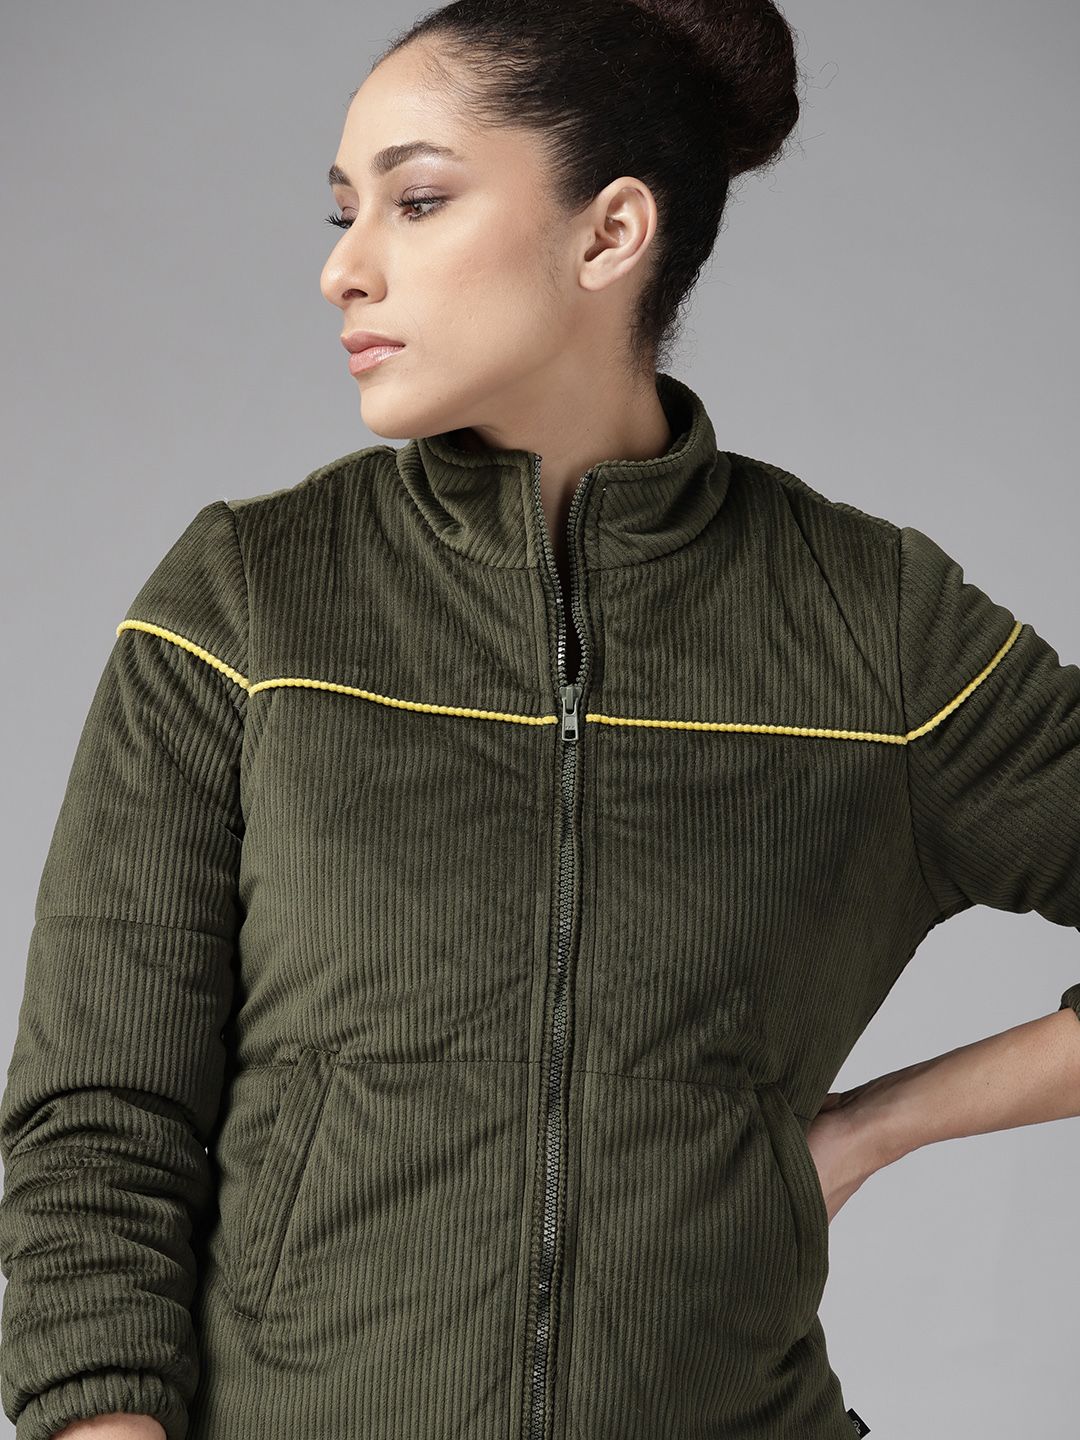 Roadster Women Olive Green Solid Corduroy Jacket Price in India